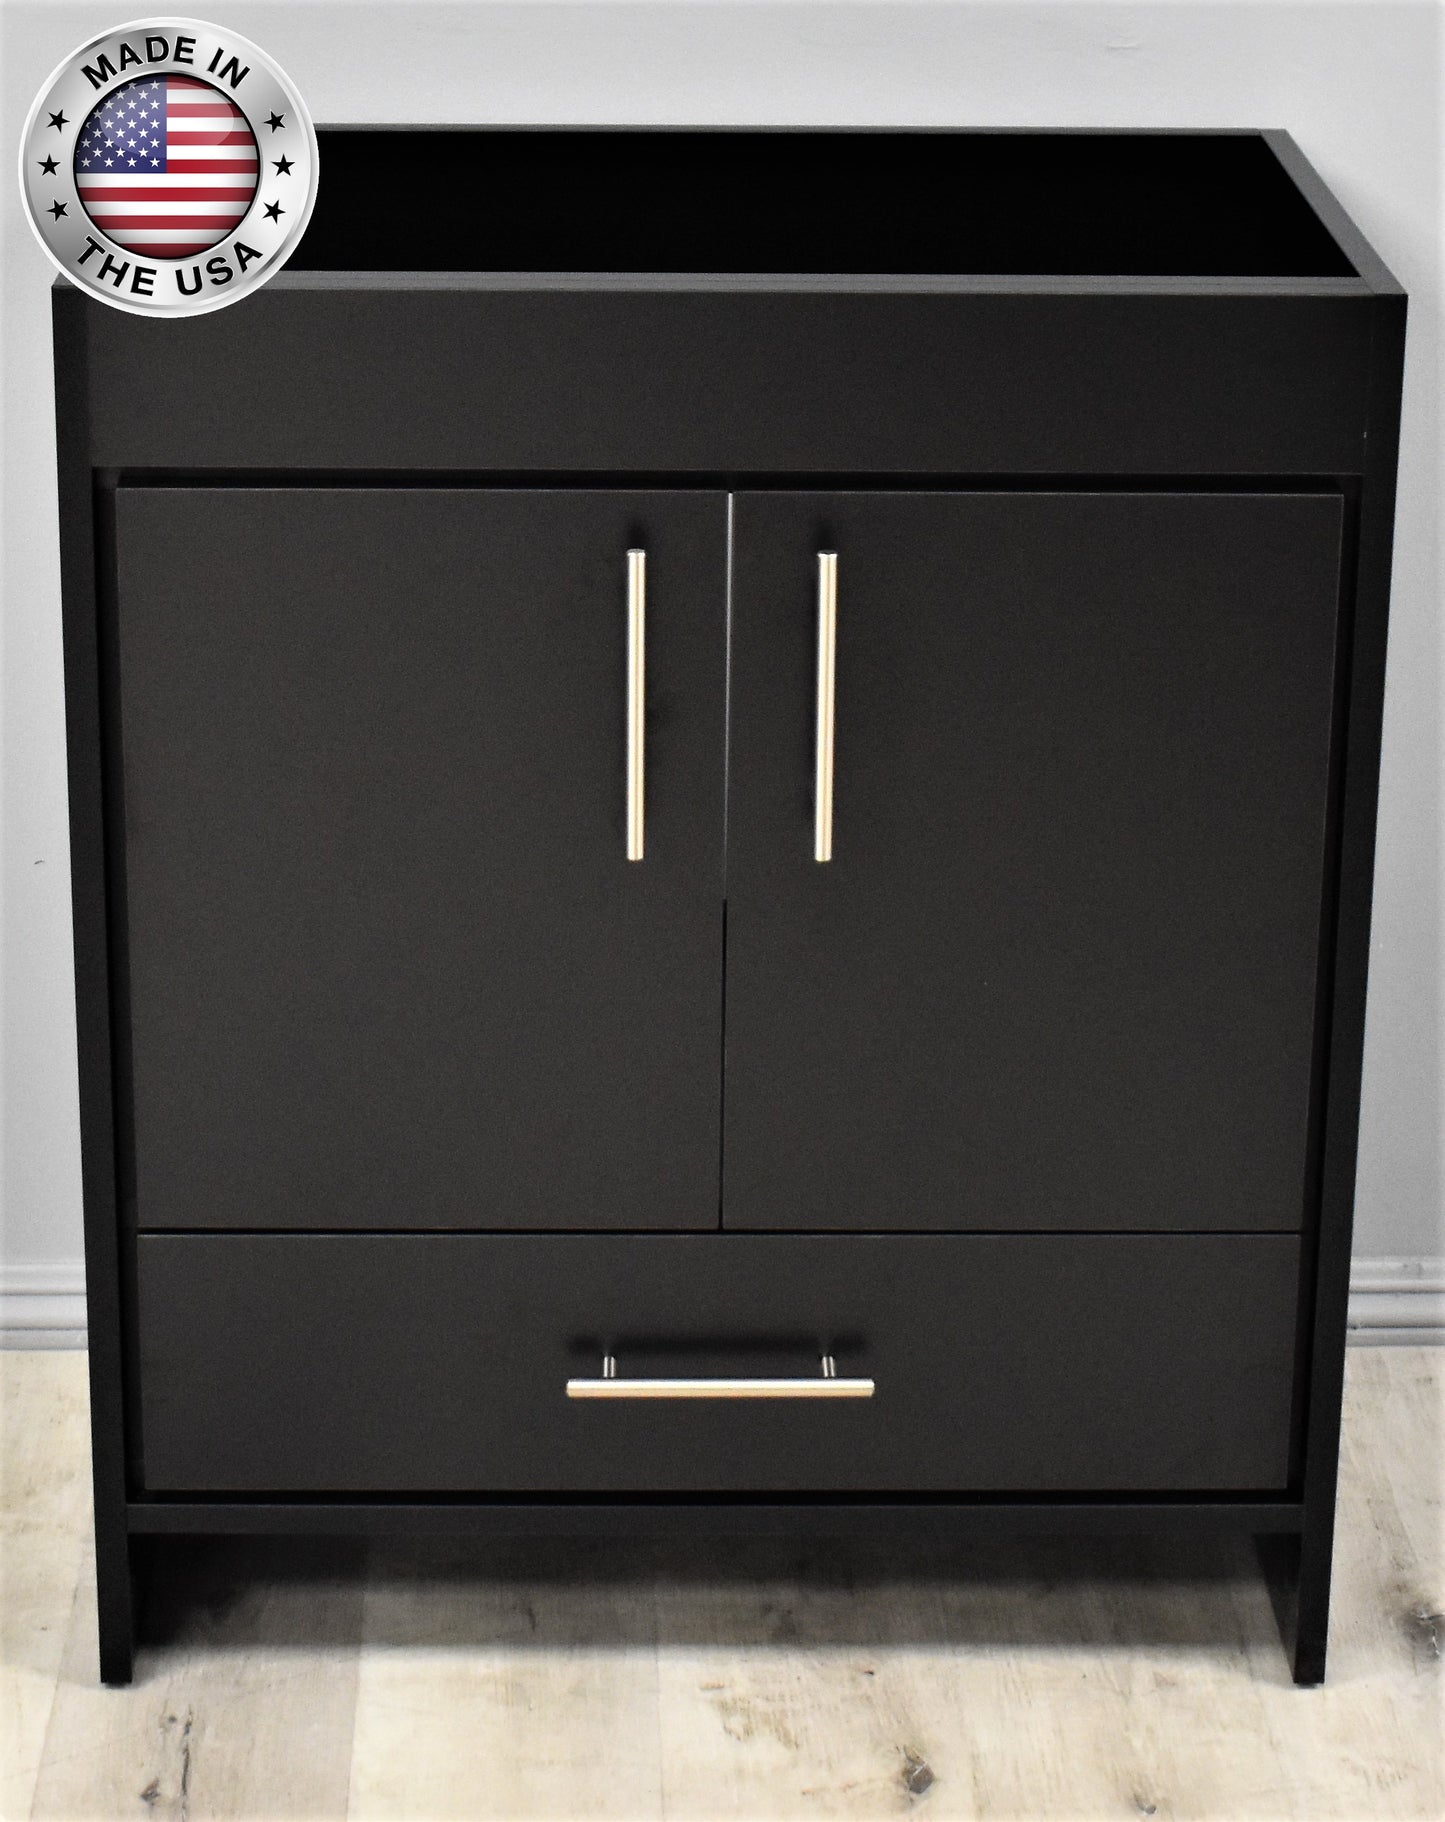 Volpa Rio 30" Modern Bathroom Vanity with Brushed Nickel Round Handles Cabinet Only - Luxe Bathroom Vanities Luxury Bathroom Fixtures Bathroom Furniture